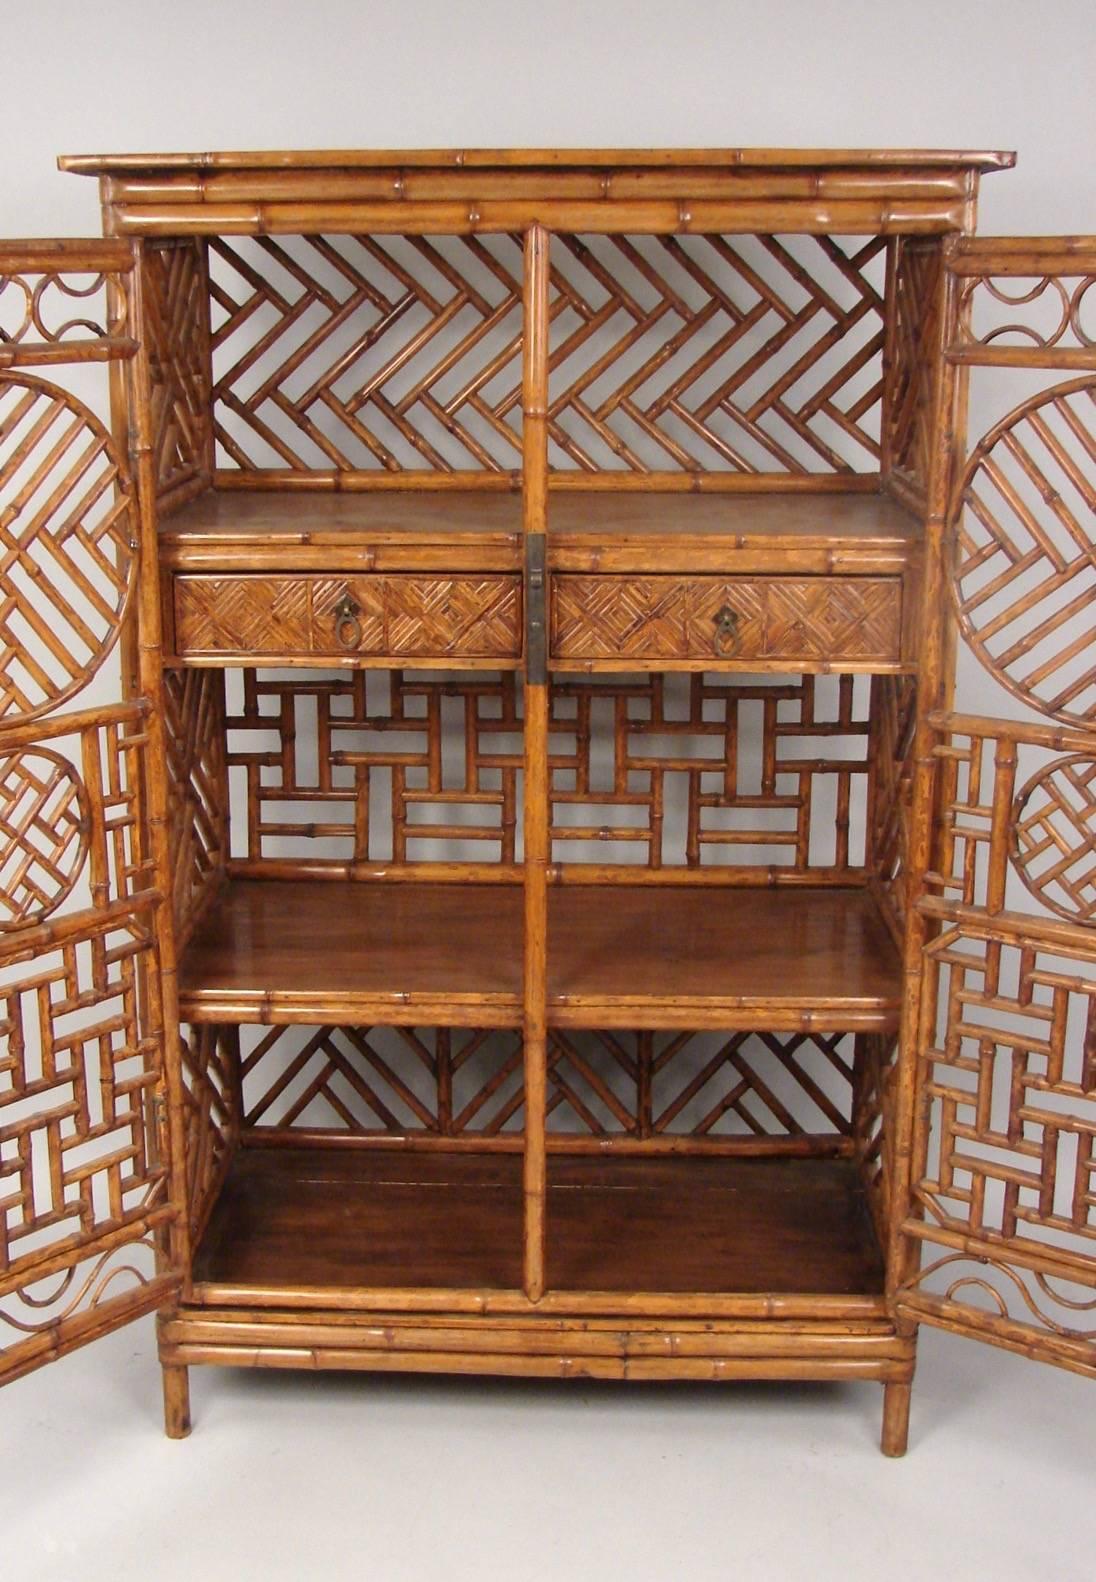 19th Century Chinese Painted Bamboo Cabinet with Interior Drawers and Shelves